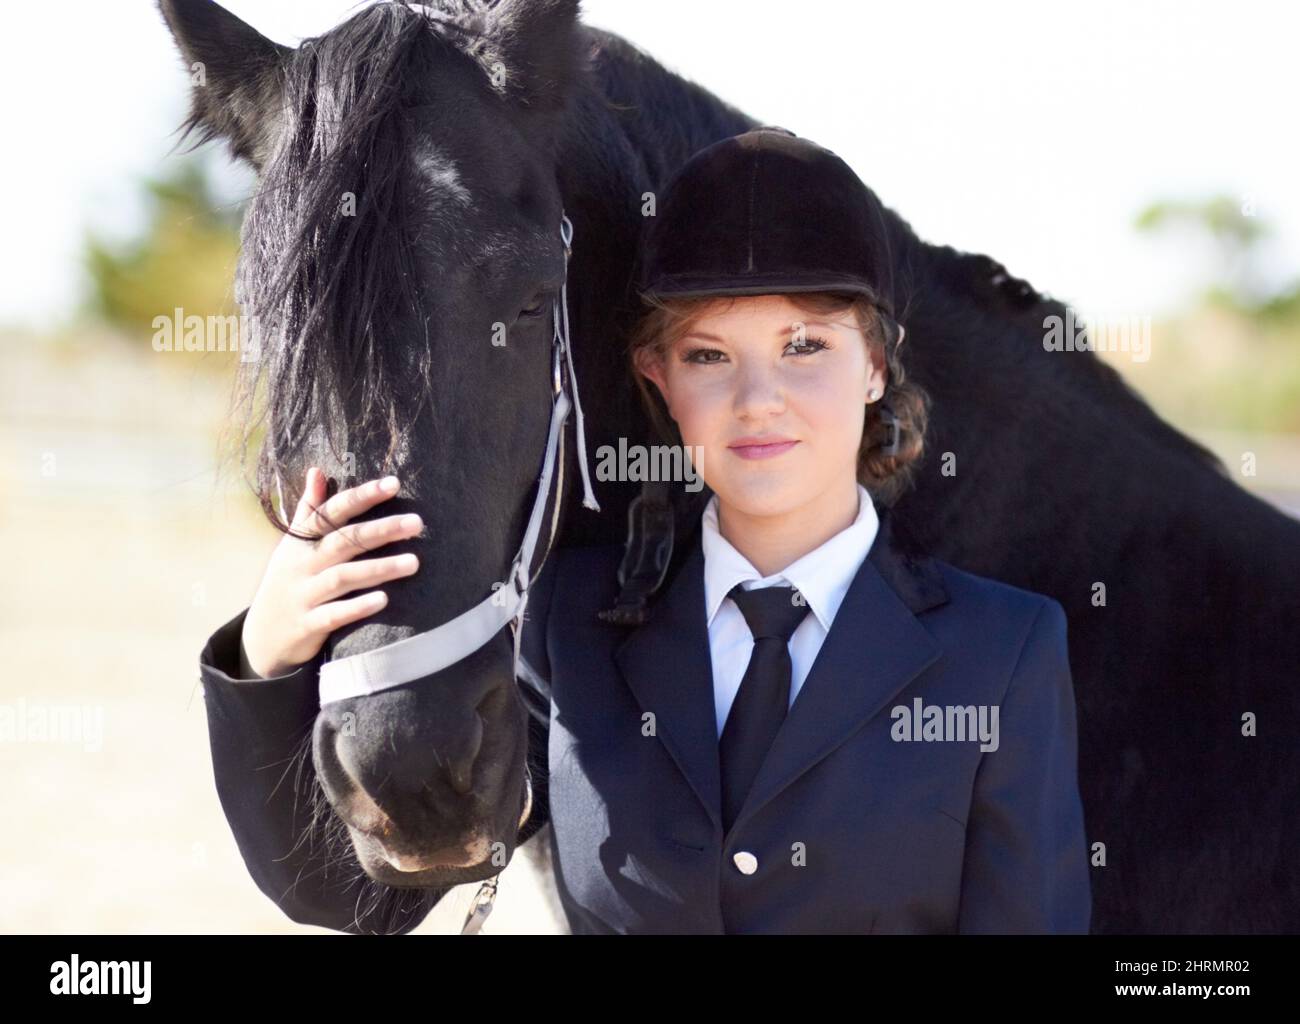 Horse and rider share a strong bond.... Portrait of a young female rider stroking her horses face and smiling proudly at the camera. Stock Photo